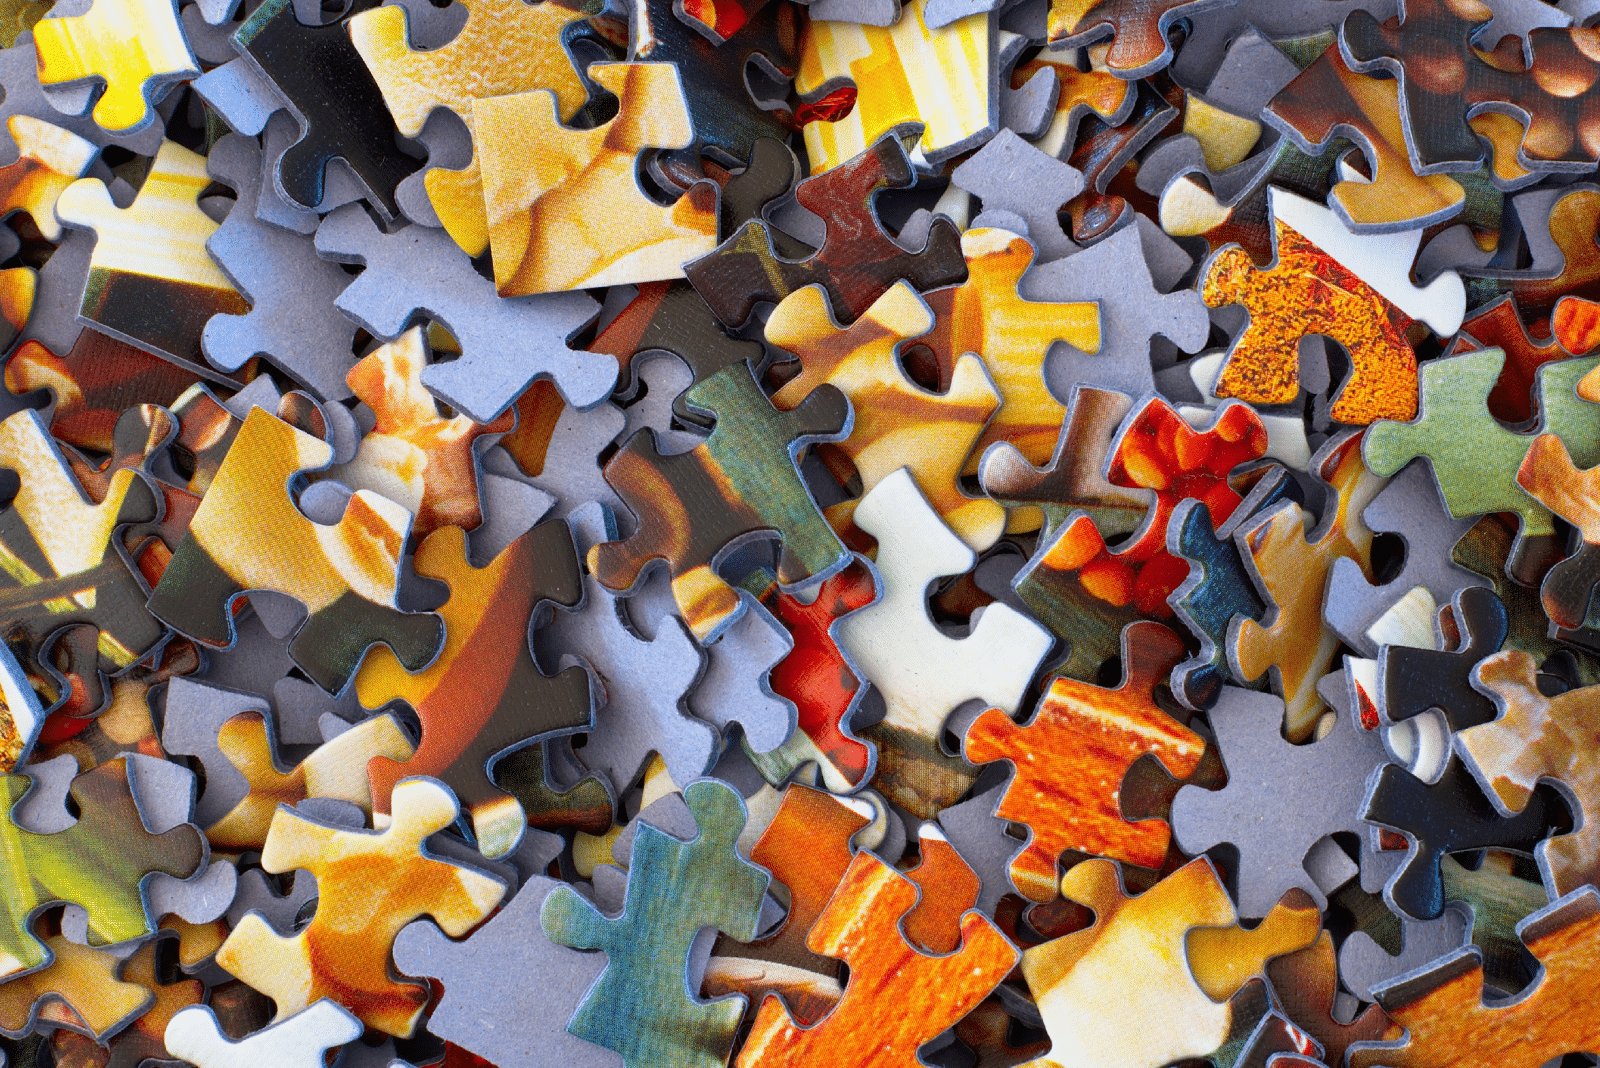 Puzzle pieces in a pile